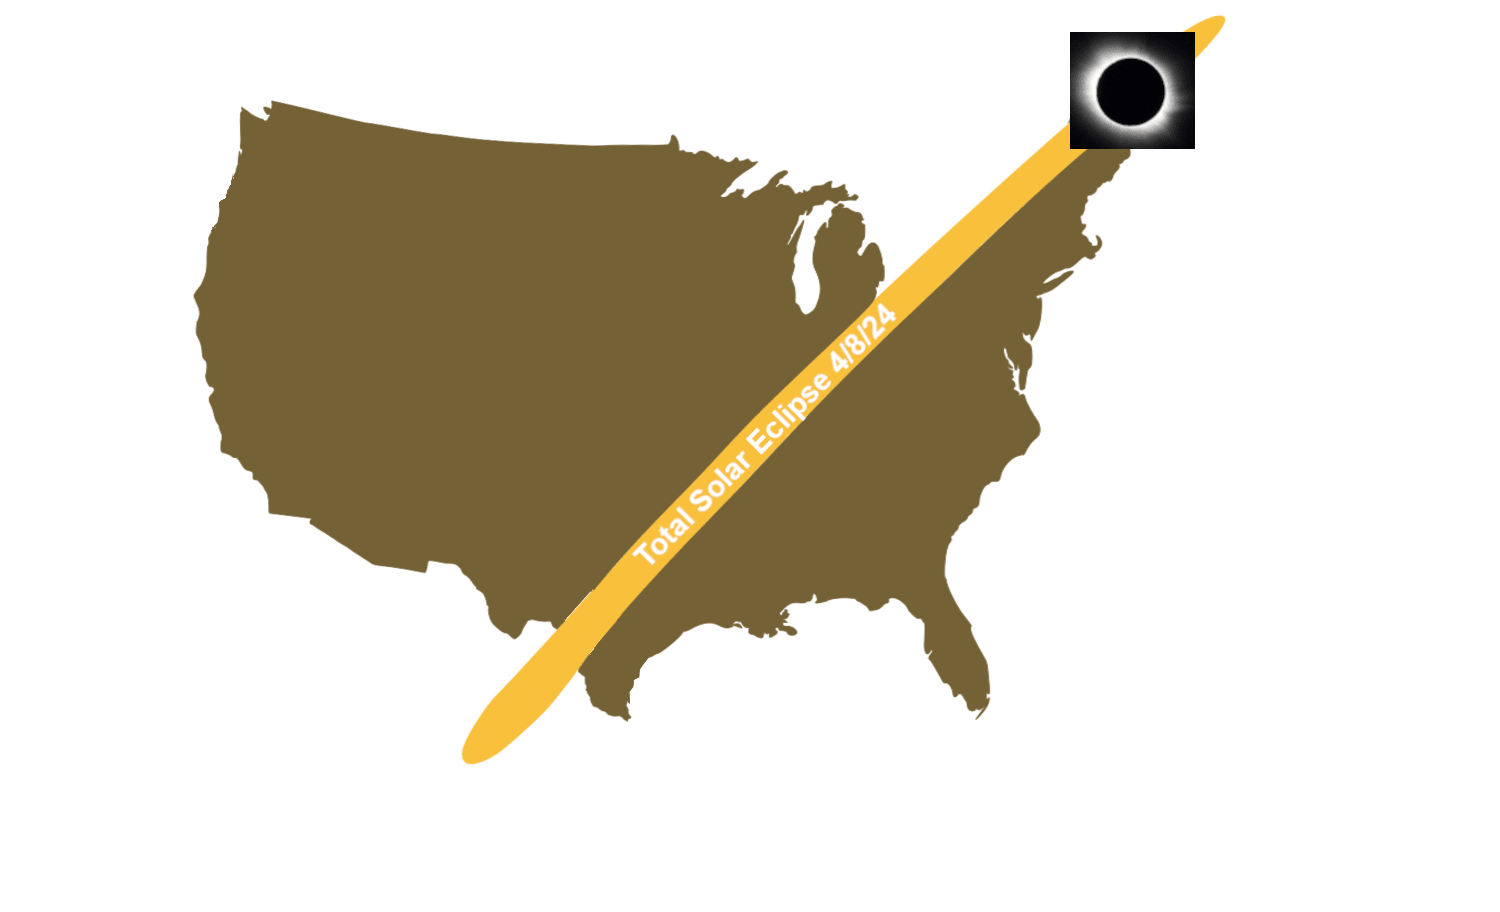 The path of the great american total solar eclipse, on April 8th, 2024.  This is where to use the Safeshot smartphone solar eclipse viewer.